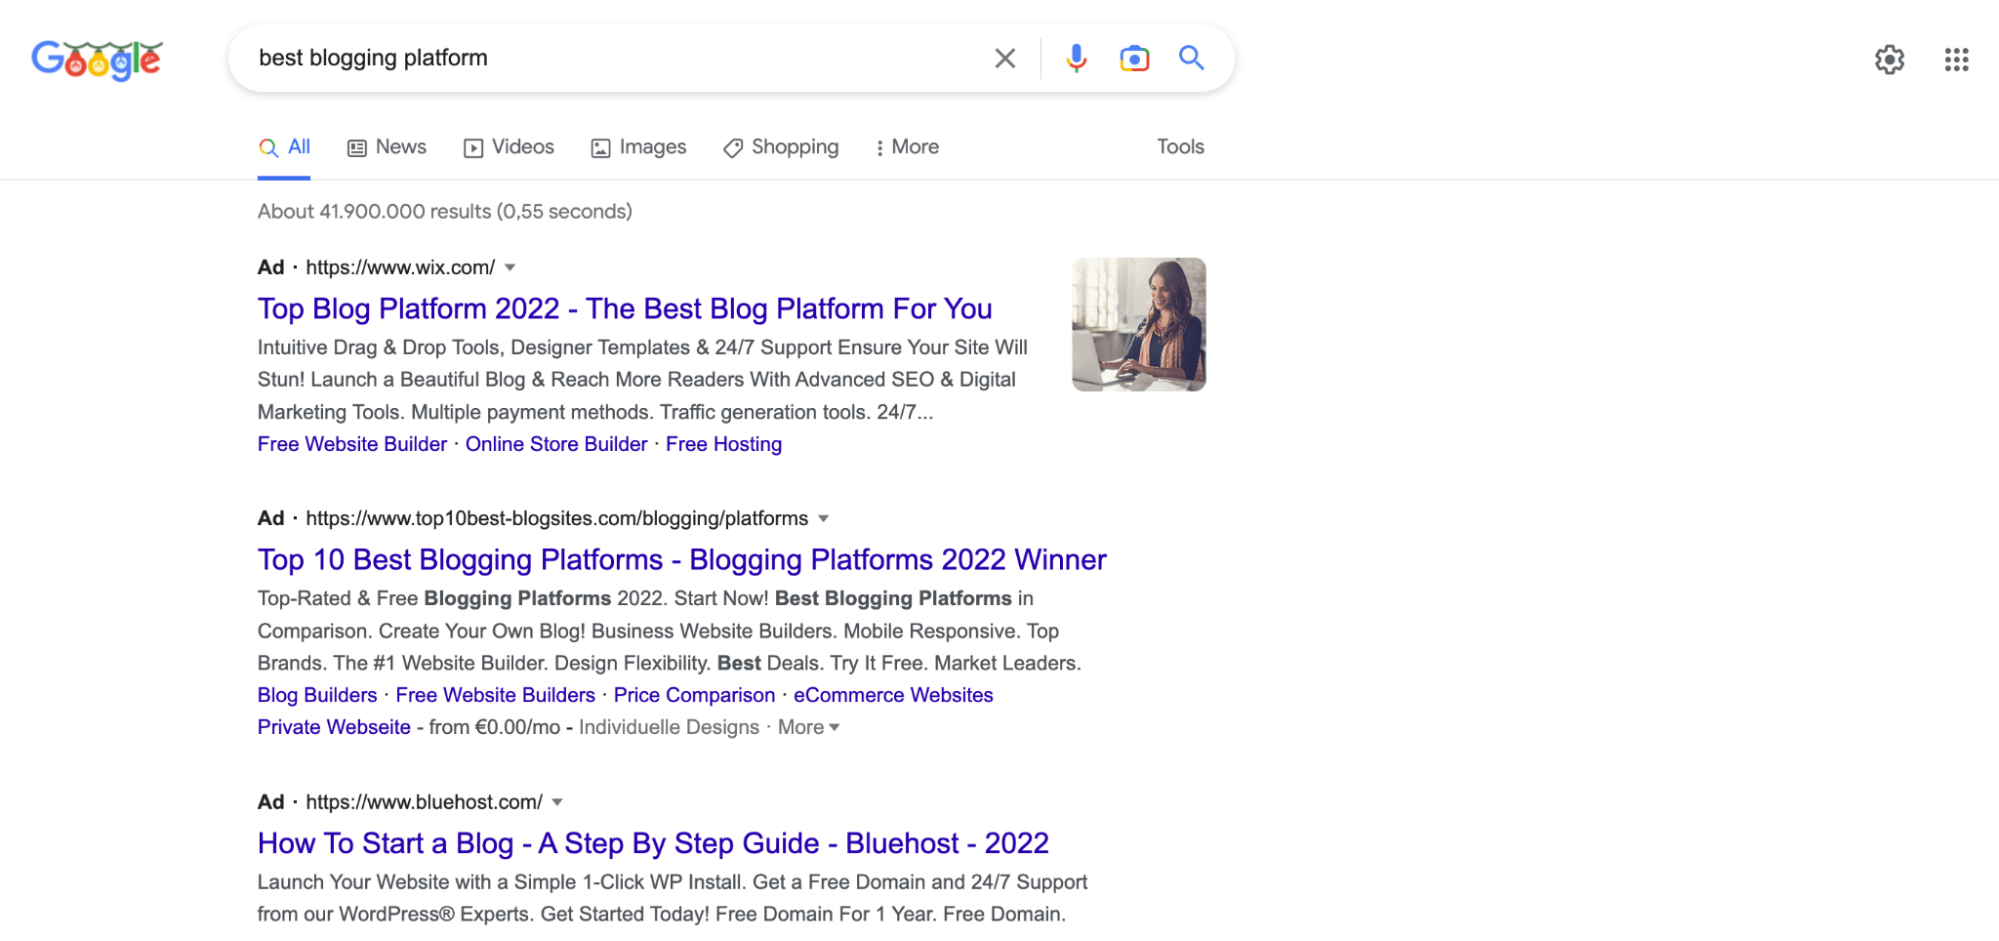 A screenshot of Google search results with three ads at the top of the SERP for the “best blogging platform” keyword